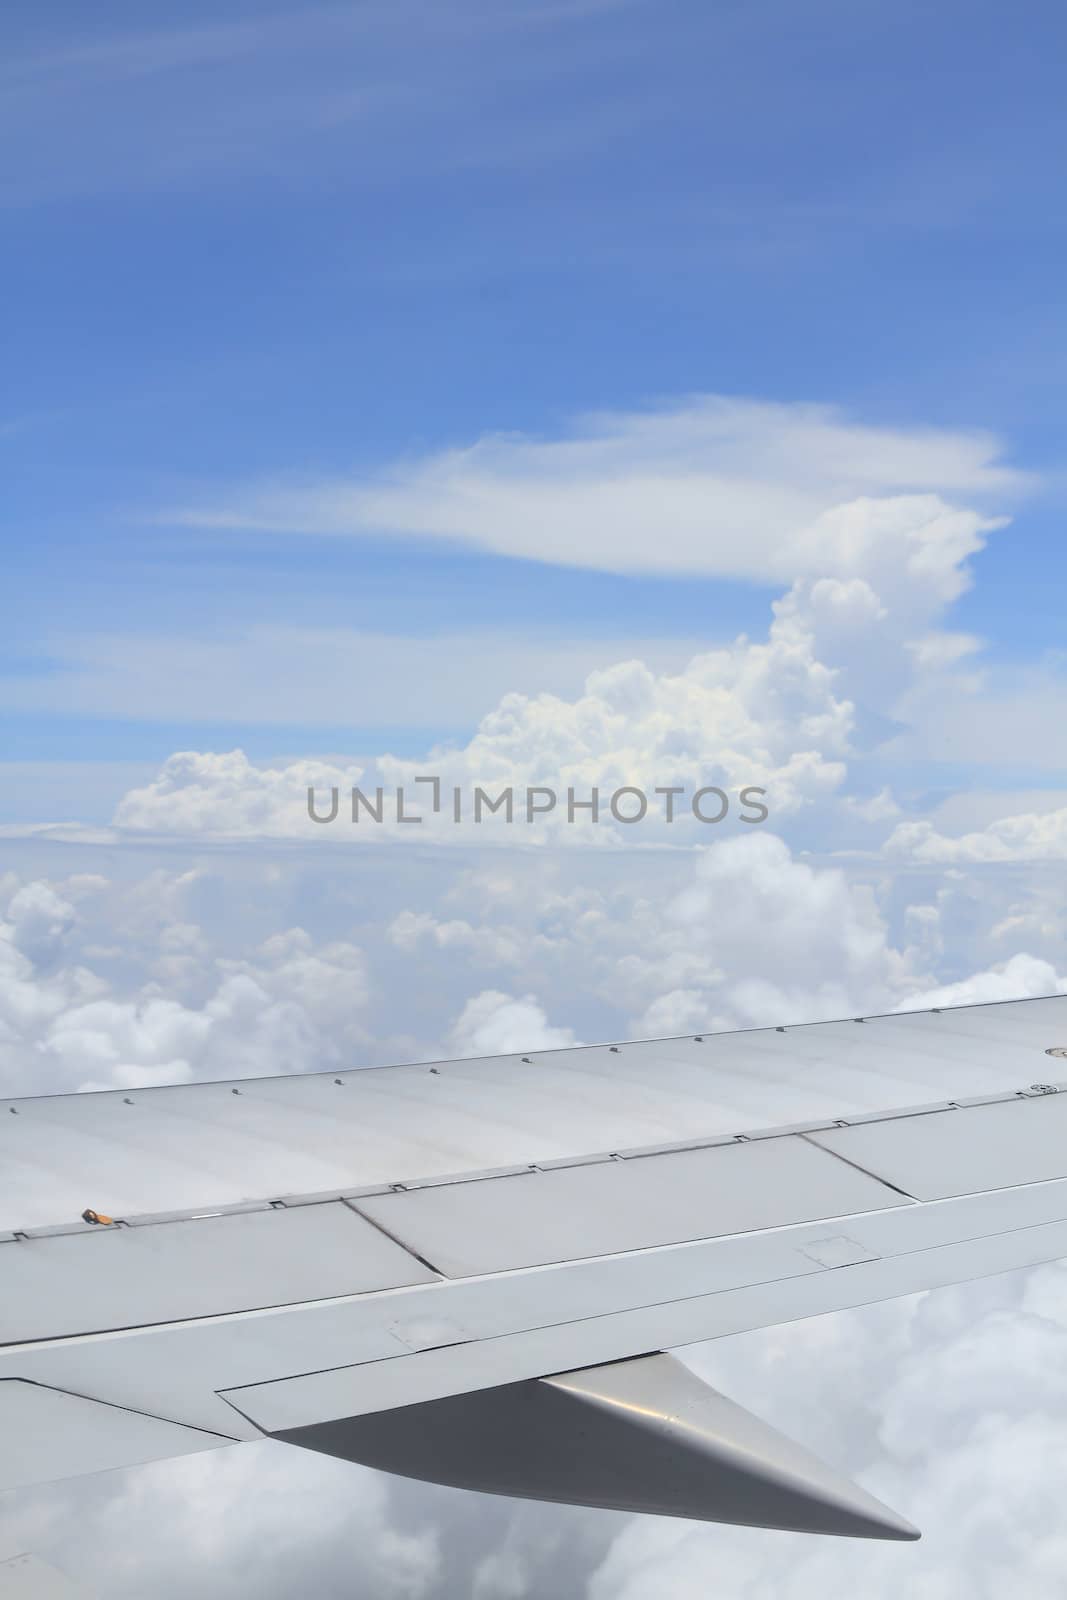 wing of the airplane under the clouds by rufous